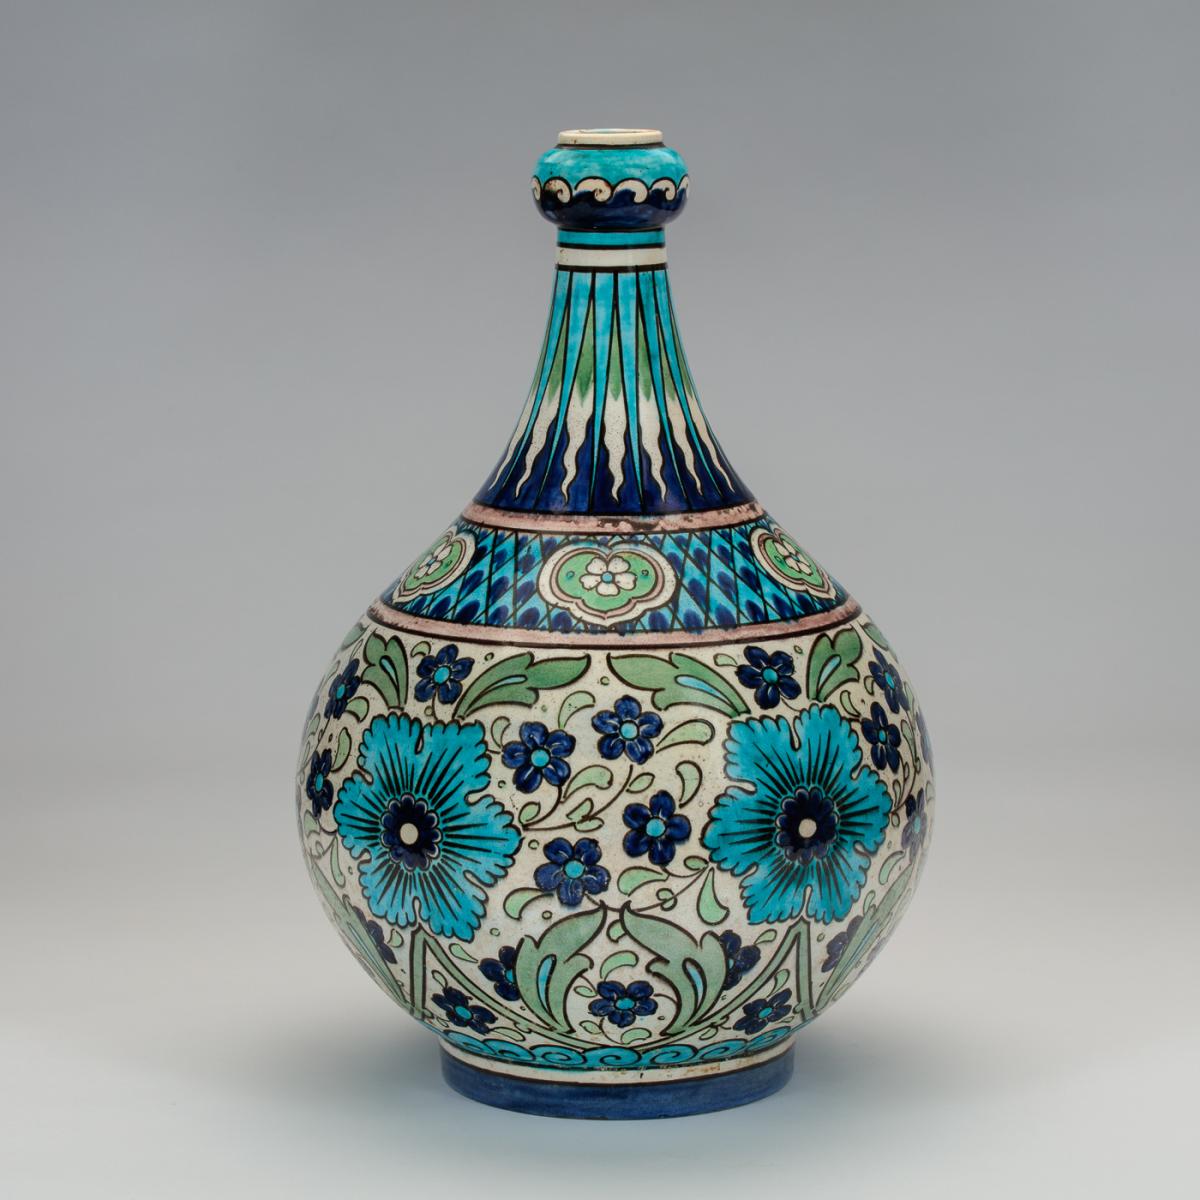 Burmantofts ‘Anglo-Persian’ Bottle